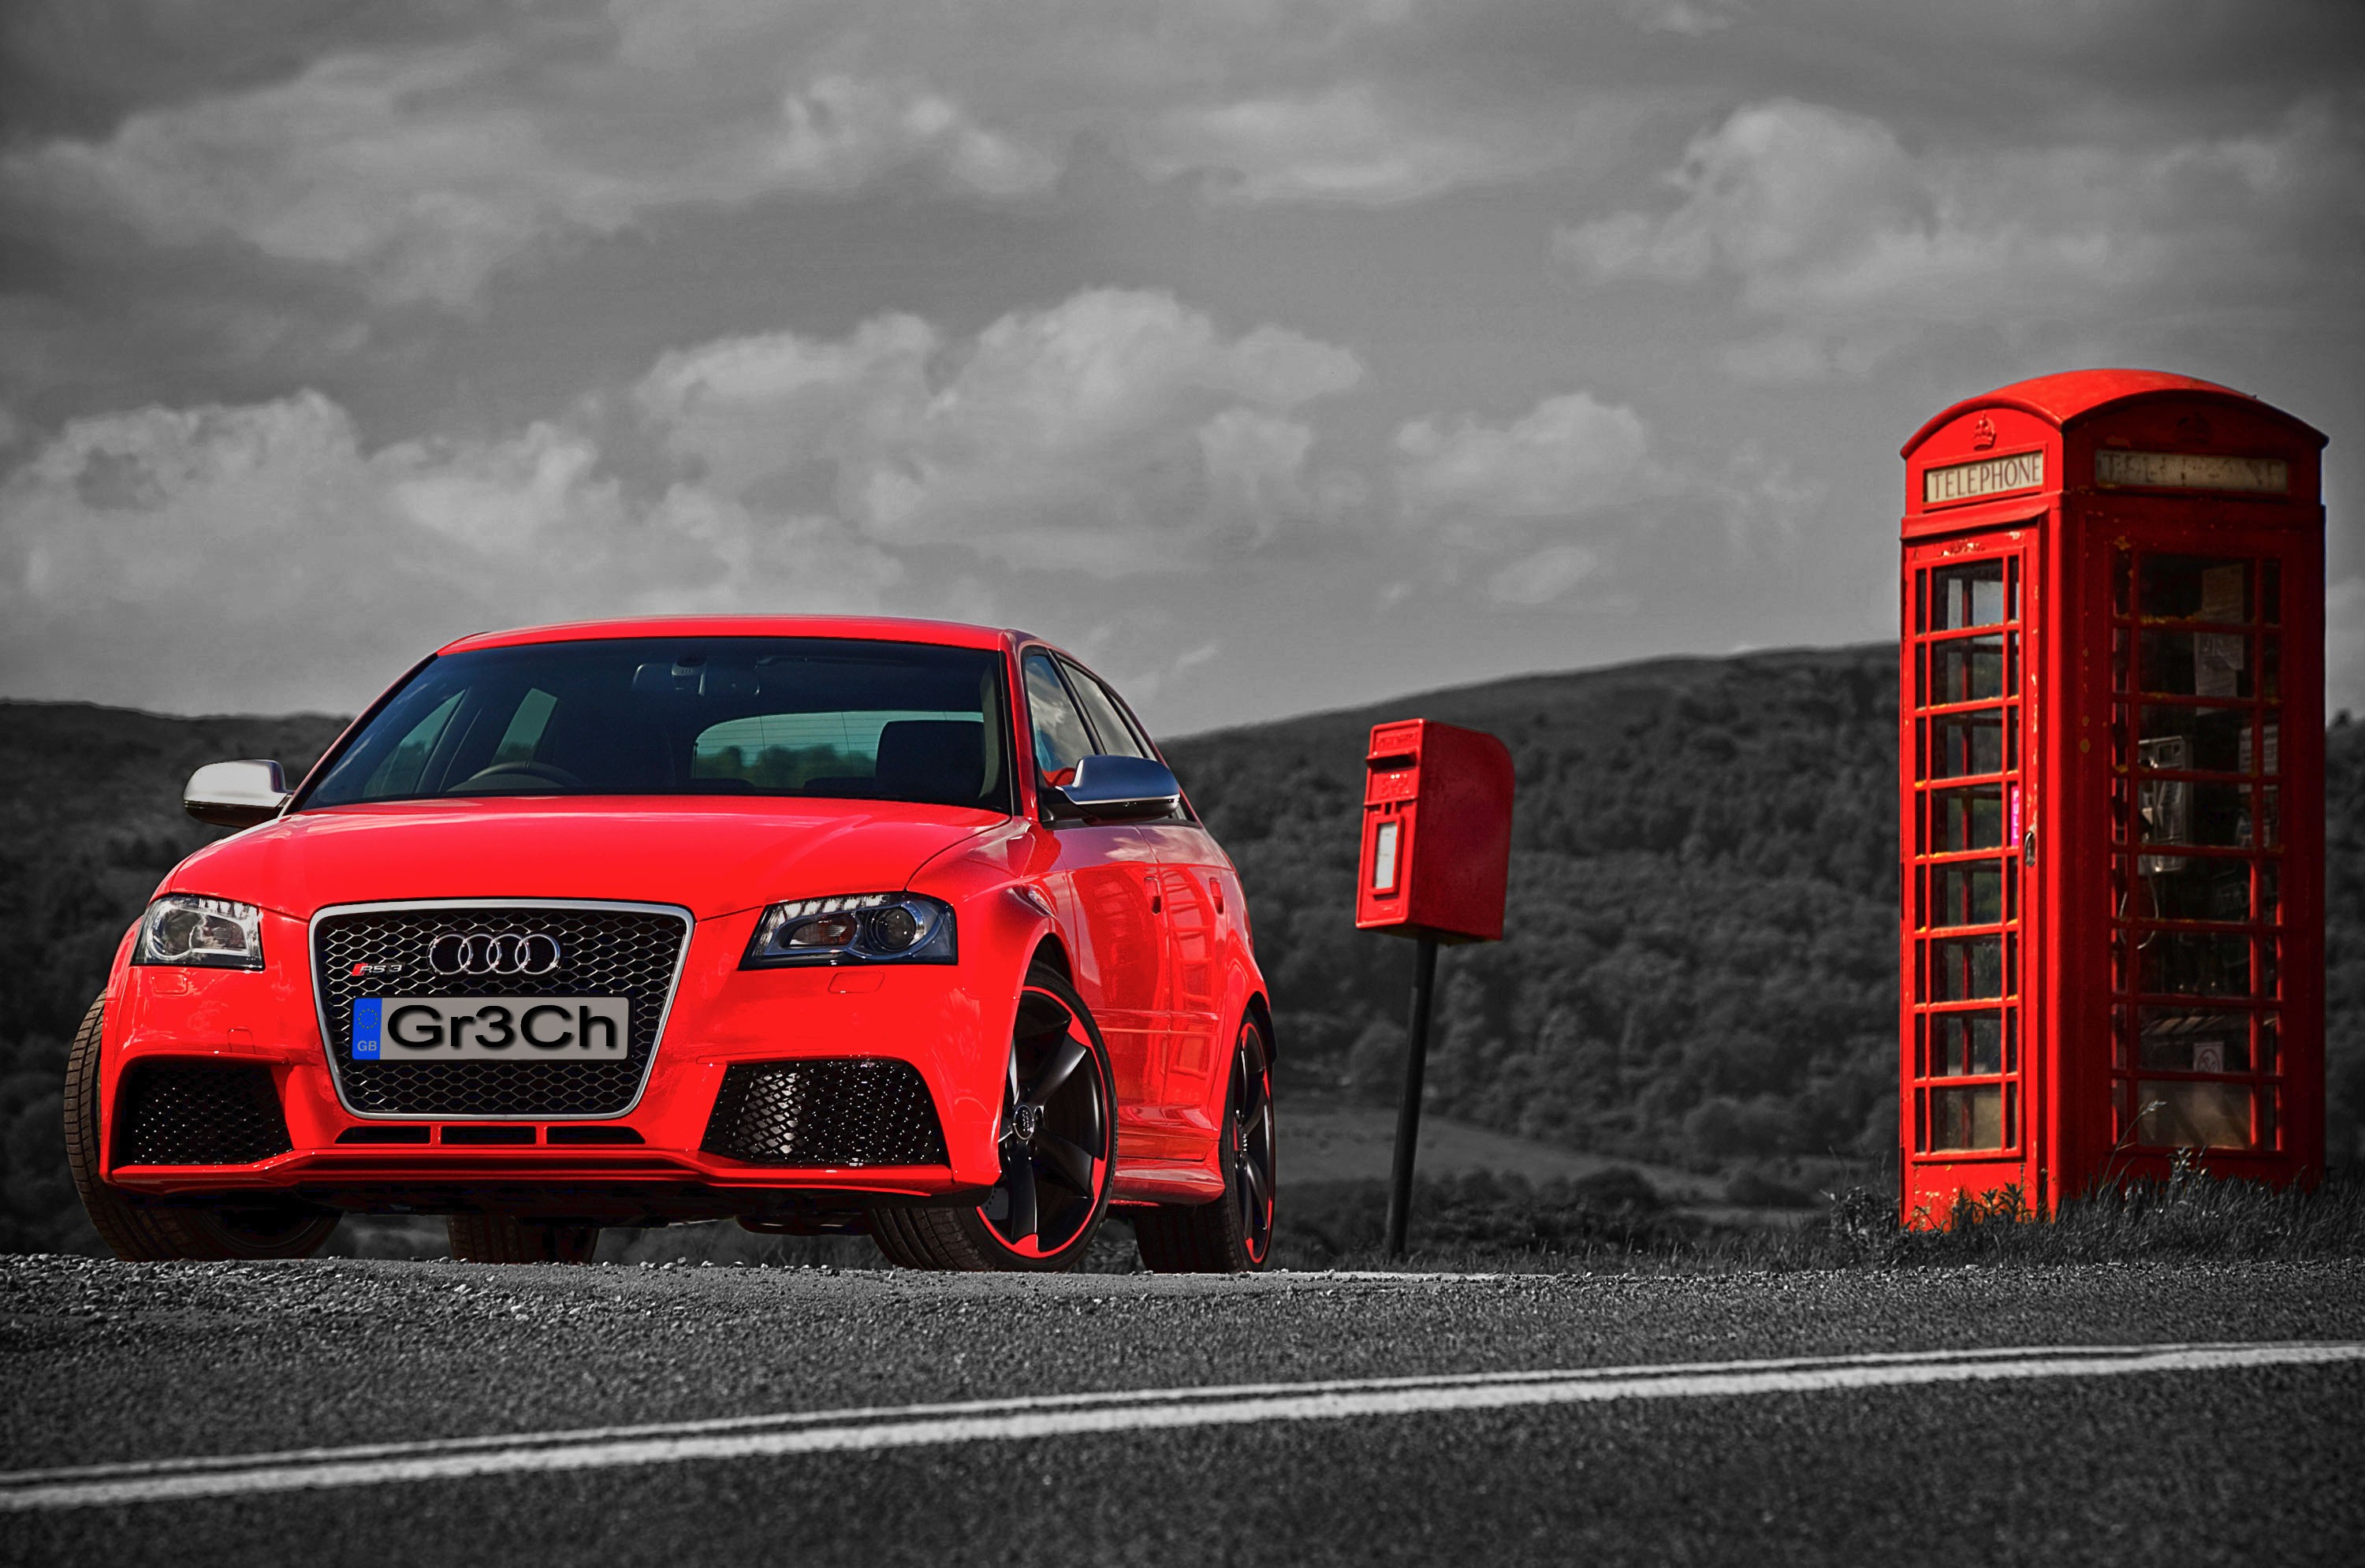 General 3000x1989 Audi car vehicle red cars selective coloring red telephone box mailbox Volkswagen Group sky phone box German cars frontal view clouds overcast road licence plates